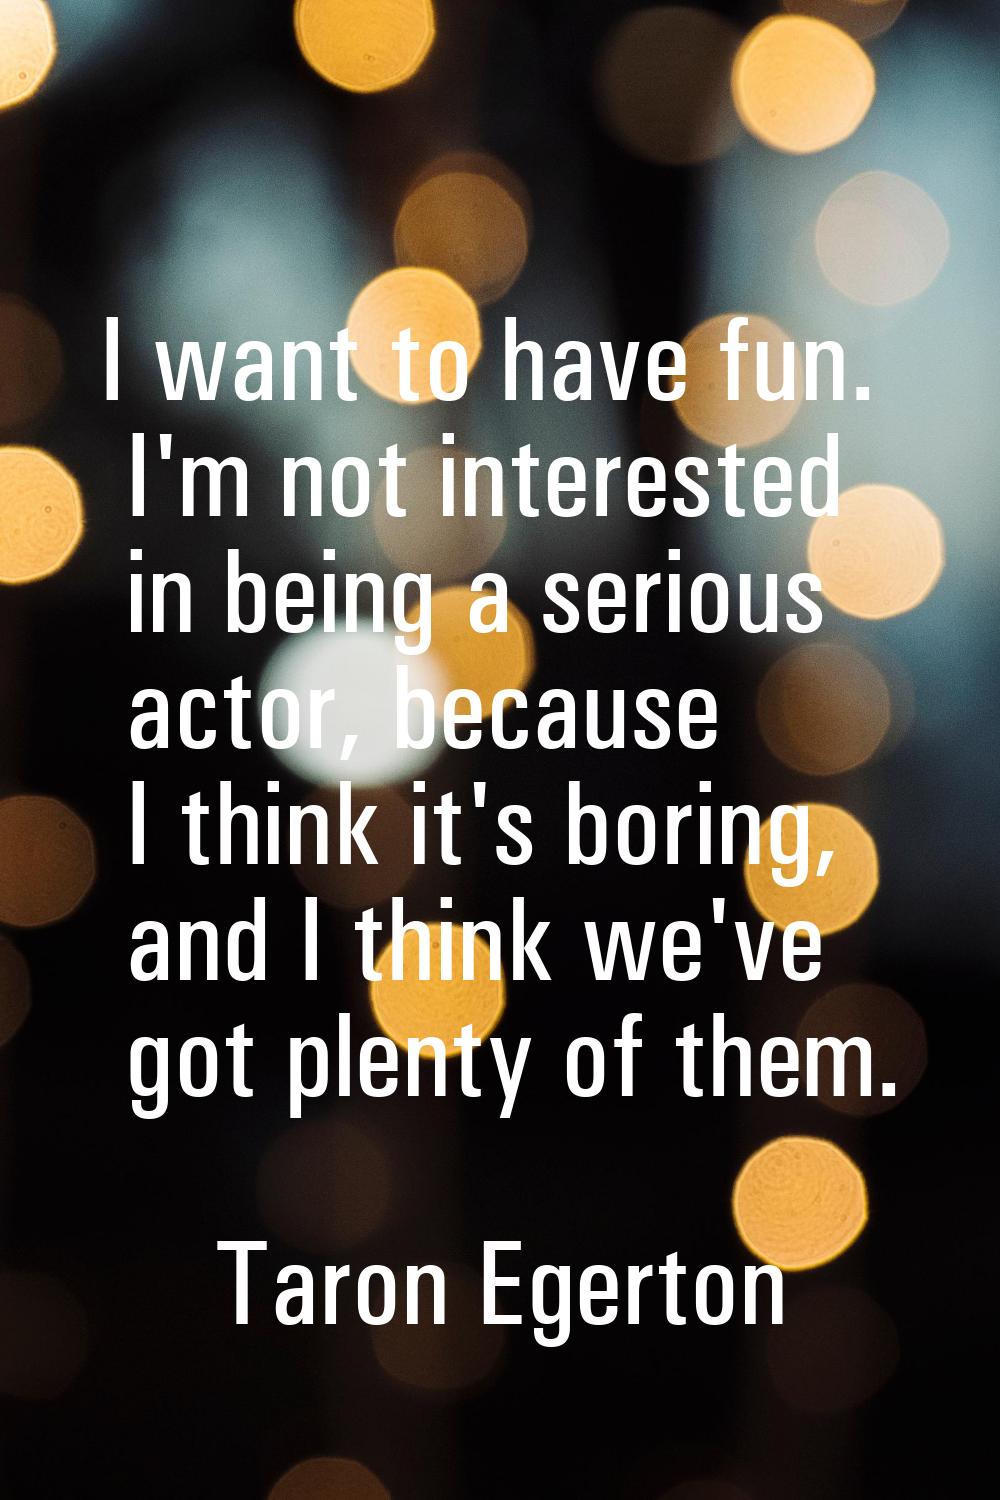 I want to have fun. I'm not interested in being a serious actor, because I think it's boring, and I